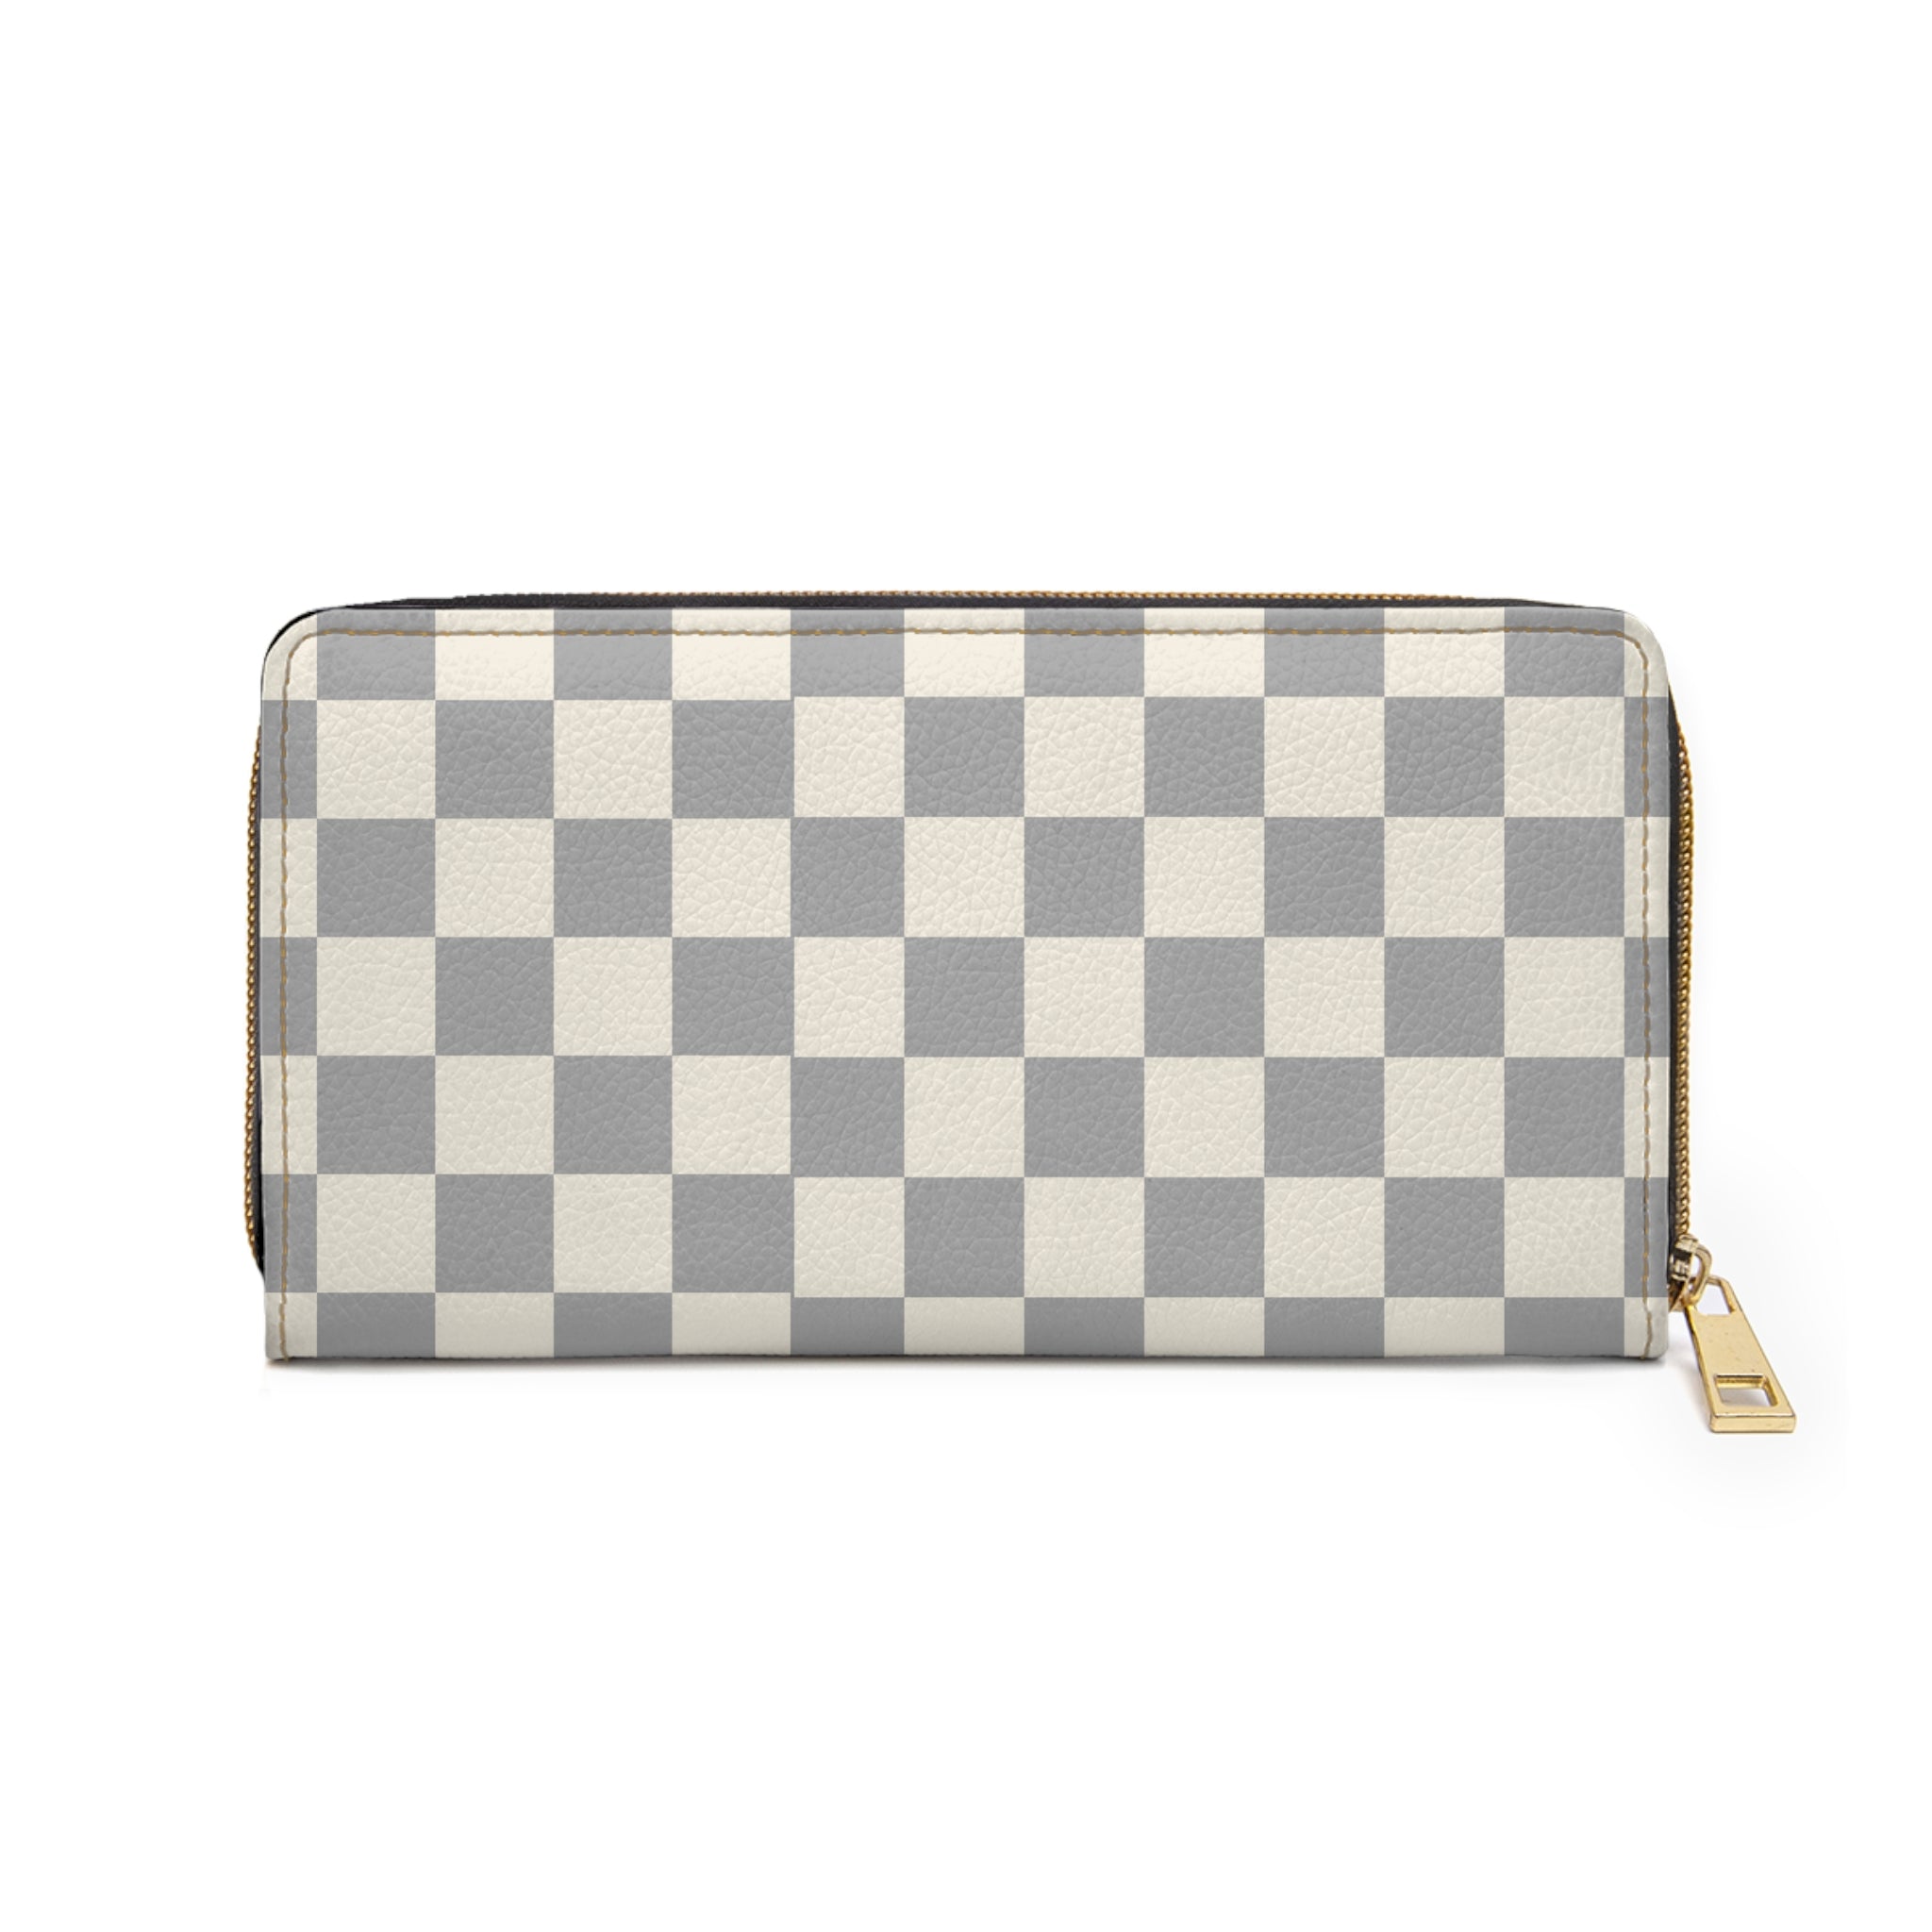 Check Mate in Light Grey and Beige Wallet, Zipper Pouch, Coin Purse, Zippered Wallet, Cute Purse